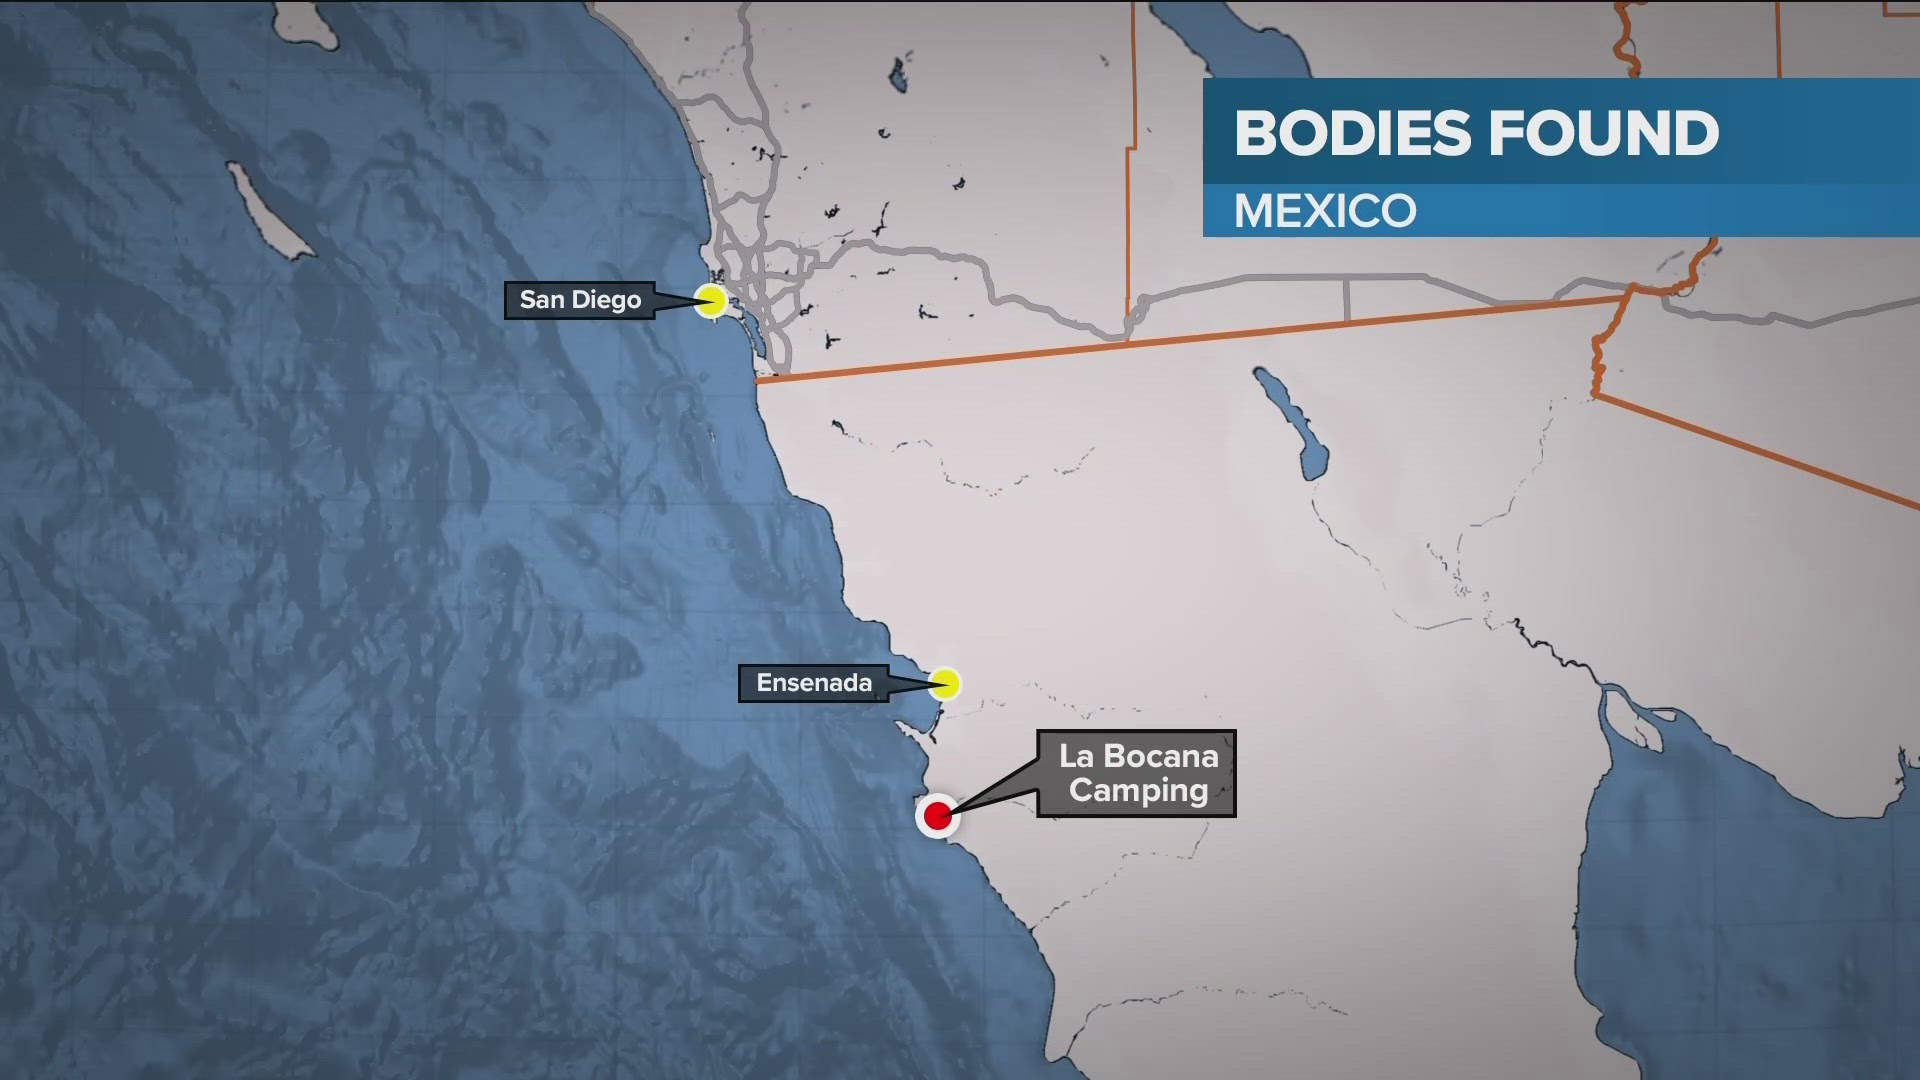 Mexican authorities have not confirmed the identities of the three men found in La Bocana.